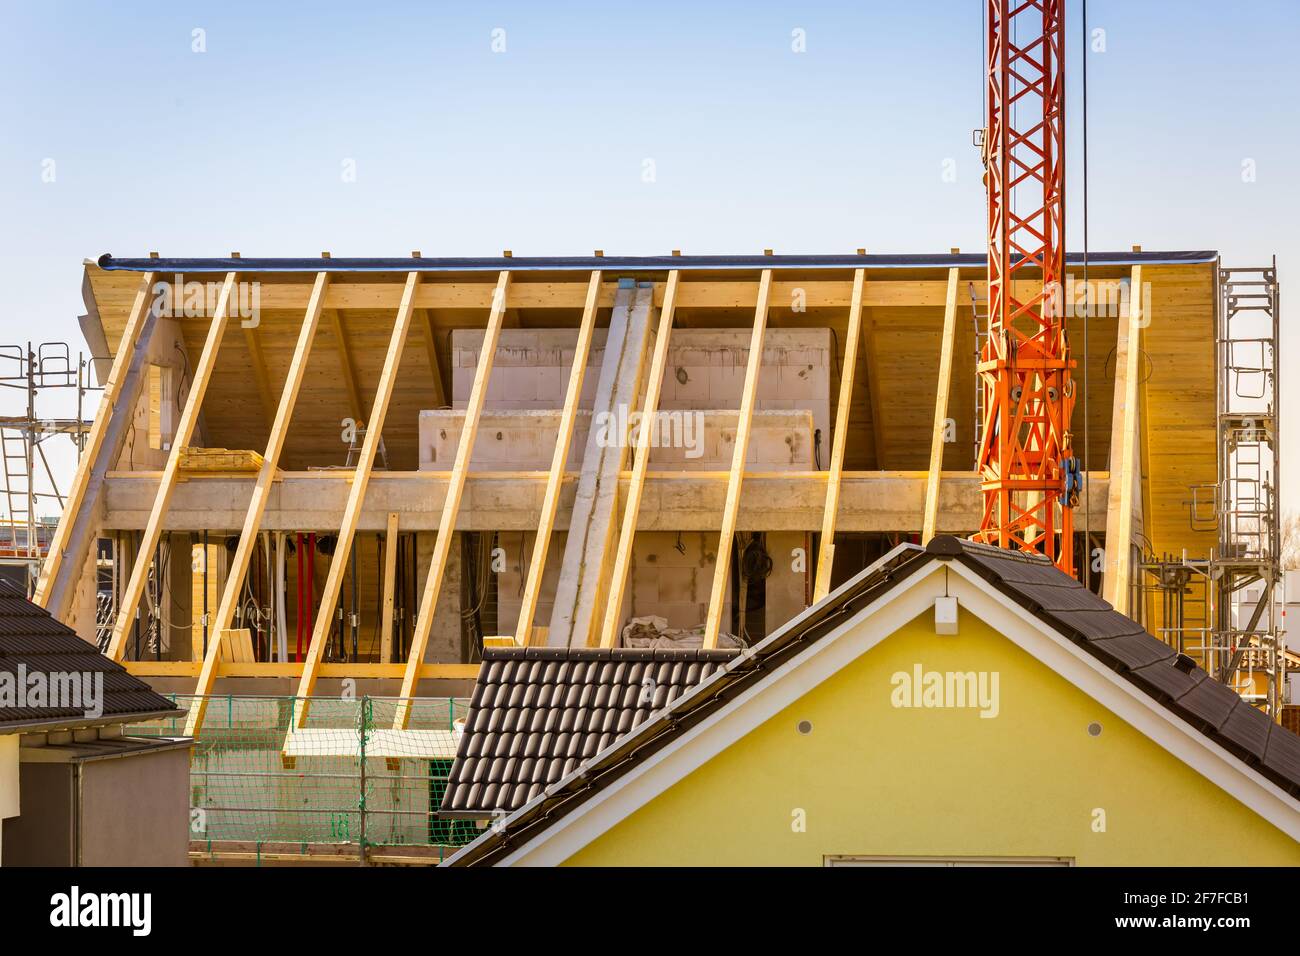 Roof construction - Industrial roof system with wooden timber. Stock Photo